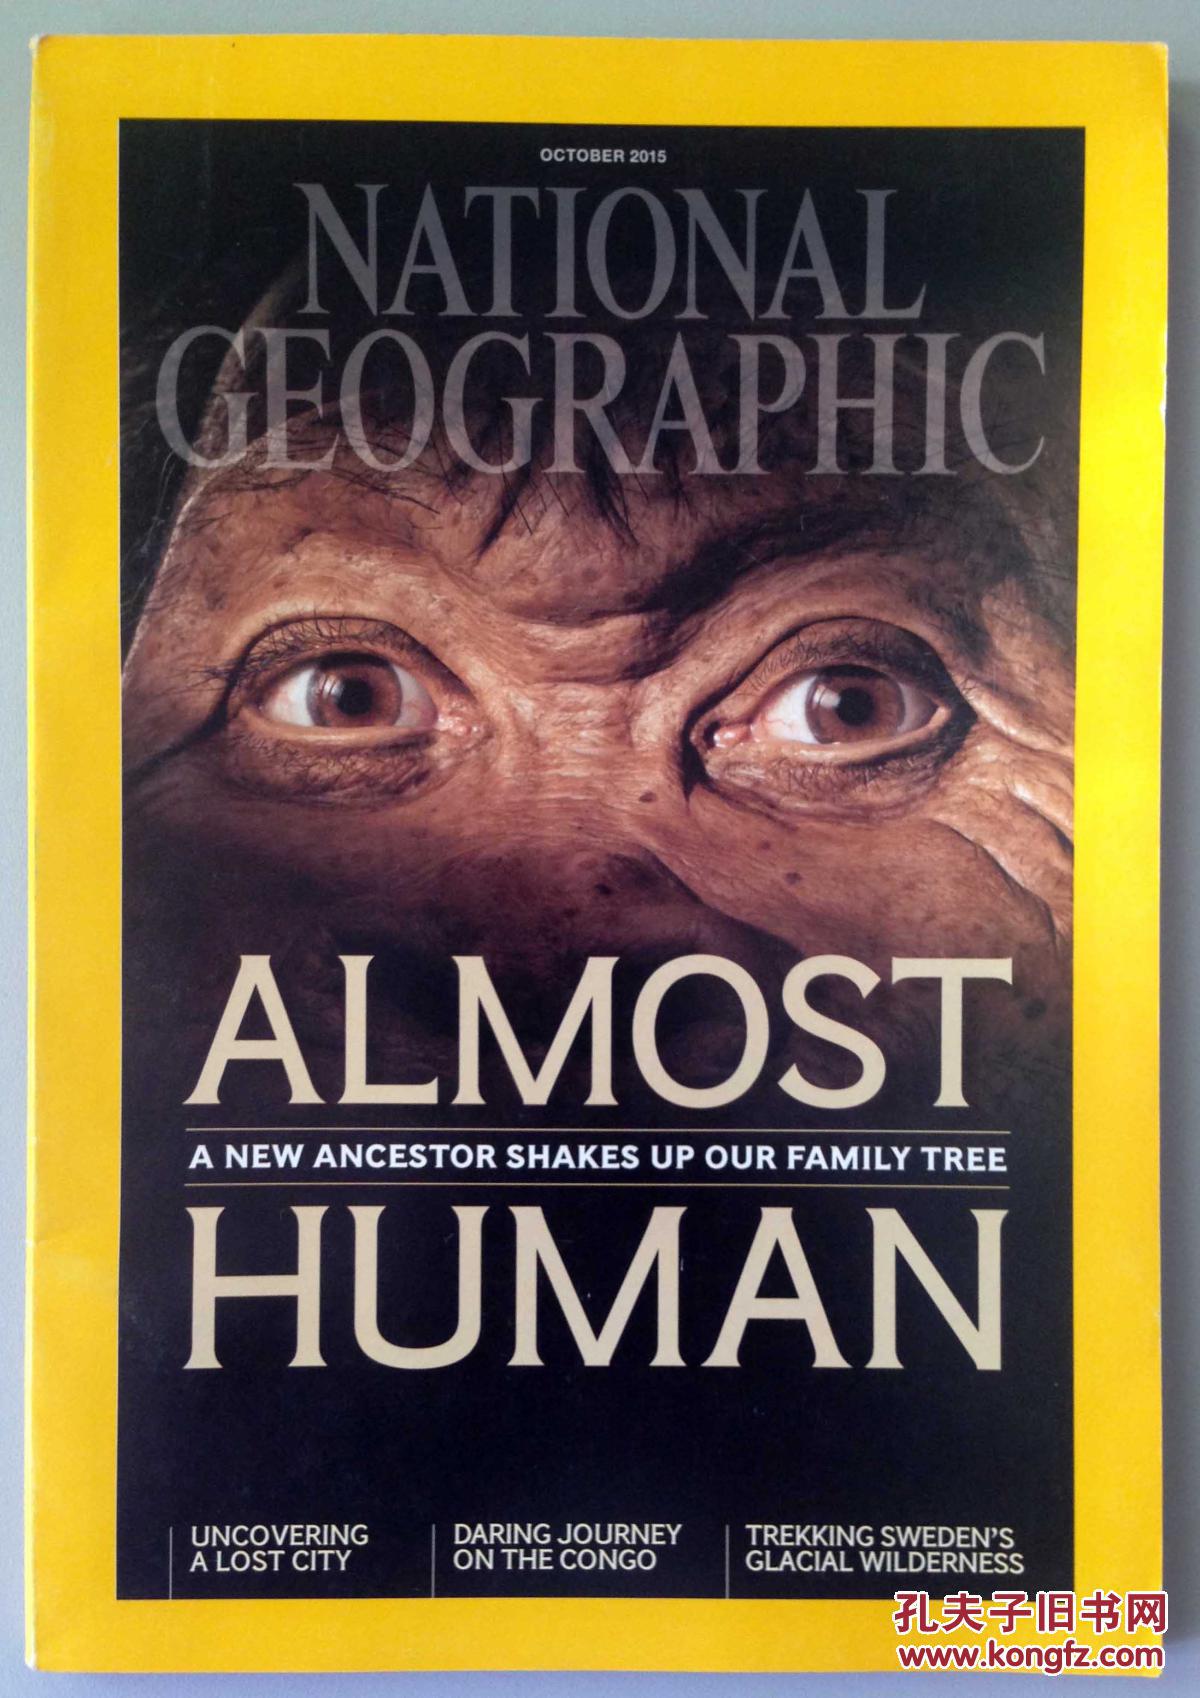 NATIONAL GEOGRAPHIC 国家地理杂志(October 2015)